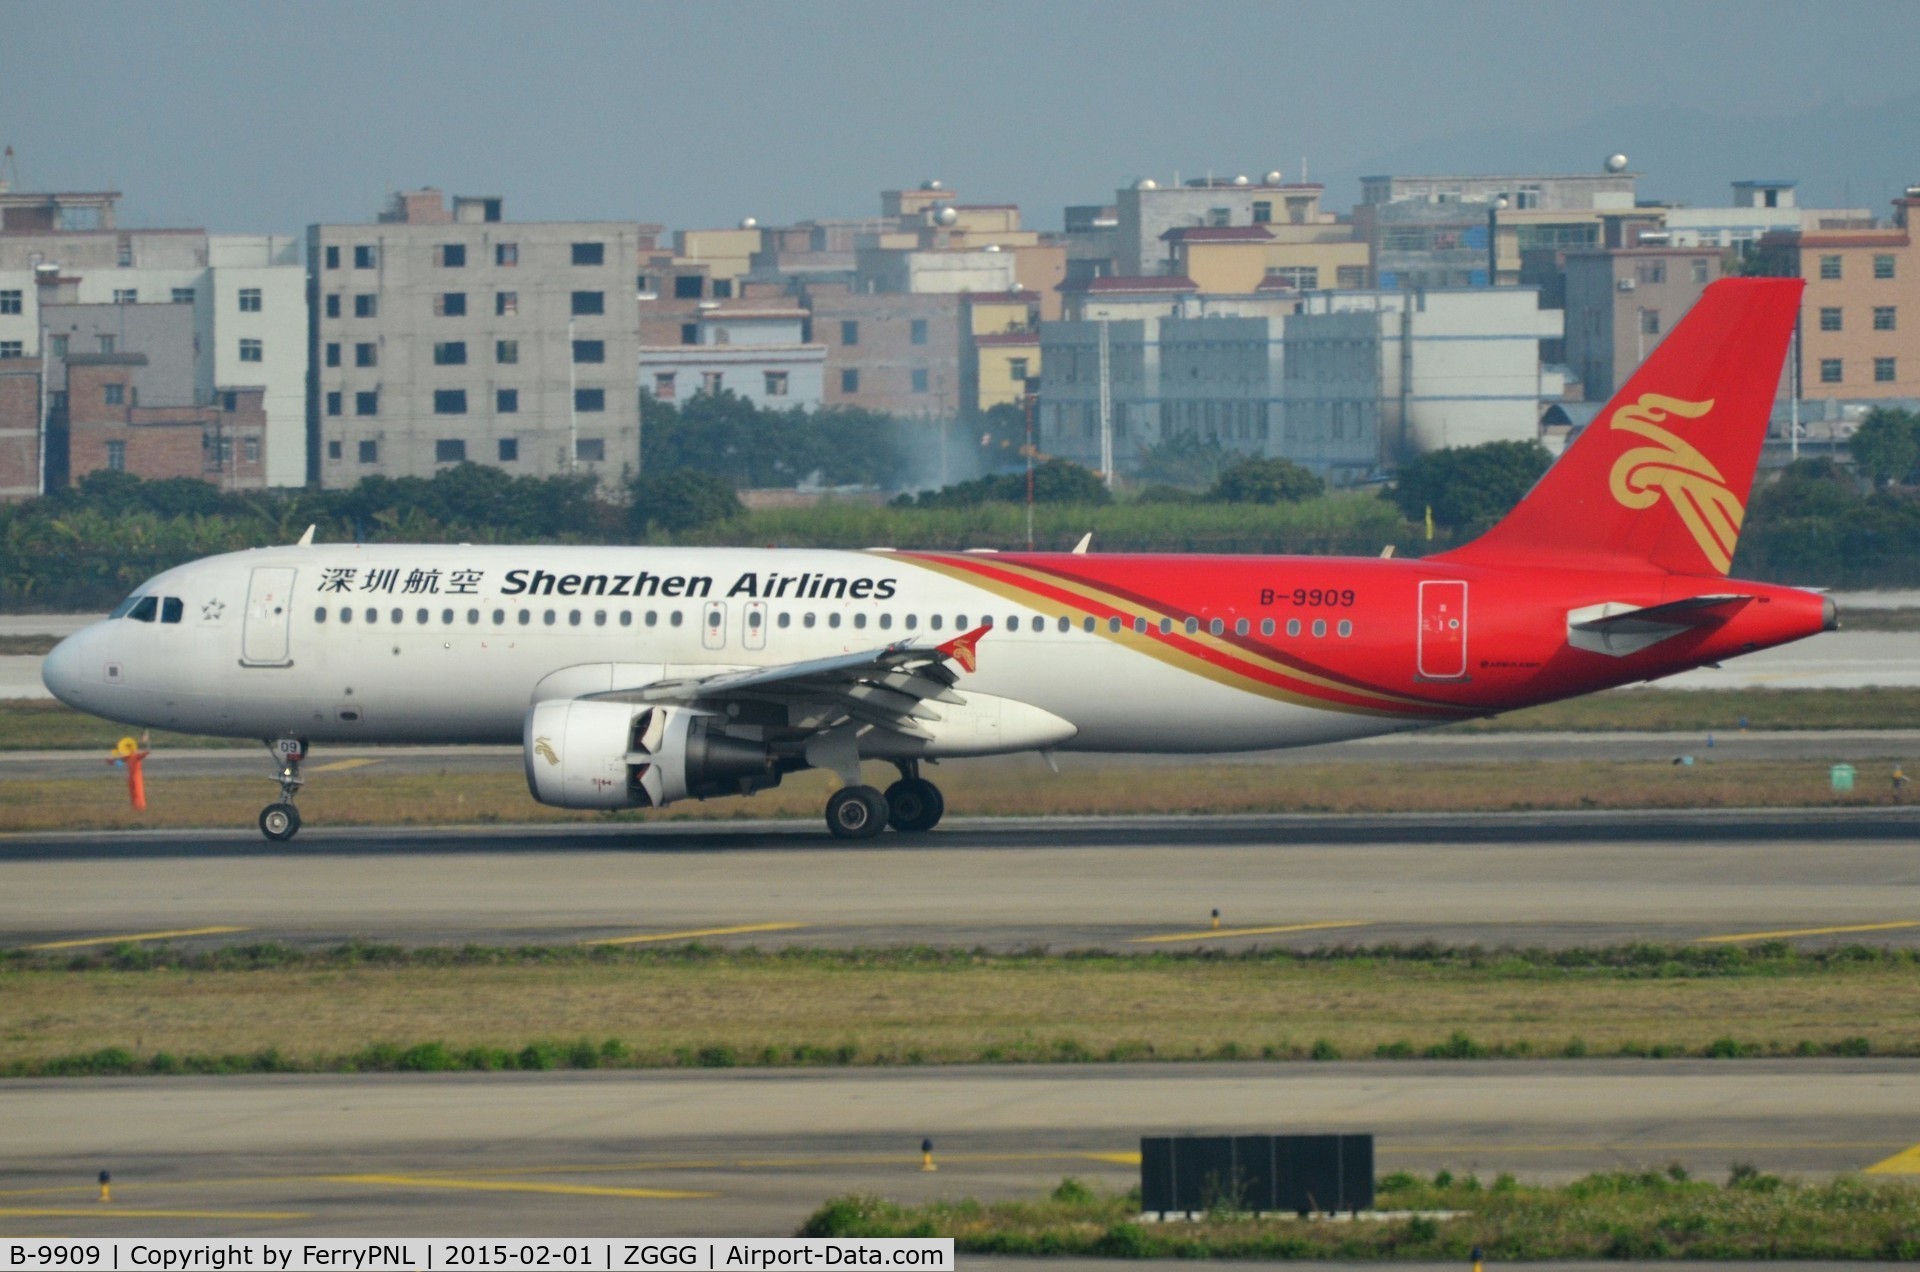 B-9909, 2013 Airbus A320-214 C/N 5521, Arrival of Shenzhen Airlines A320